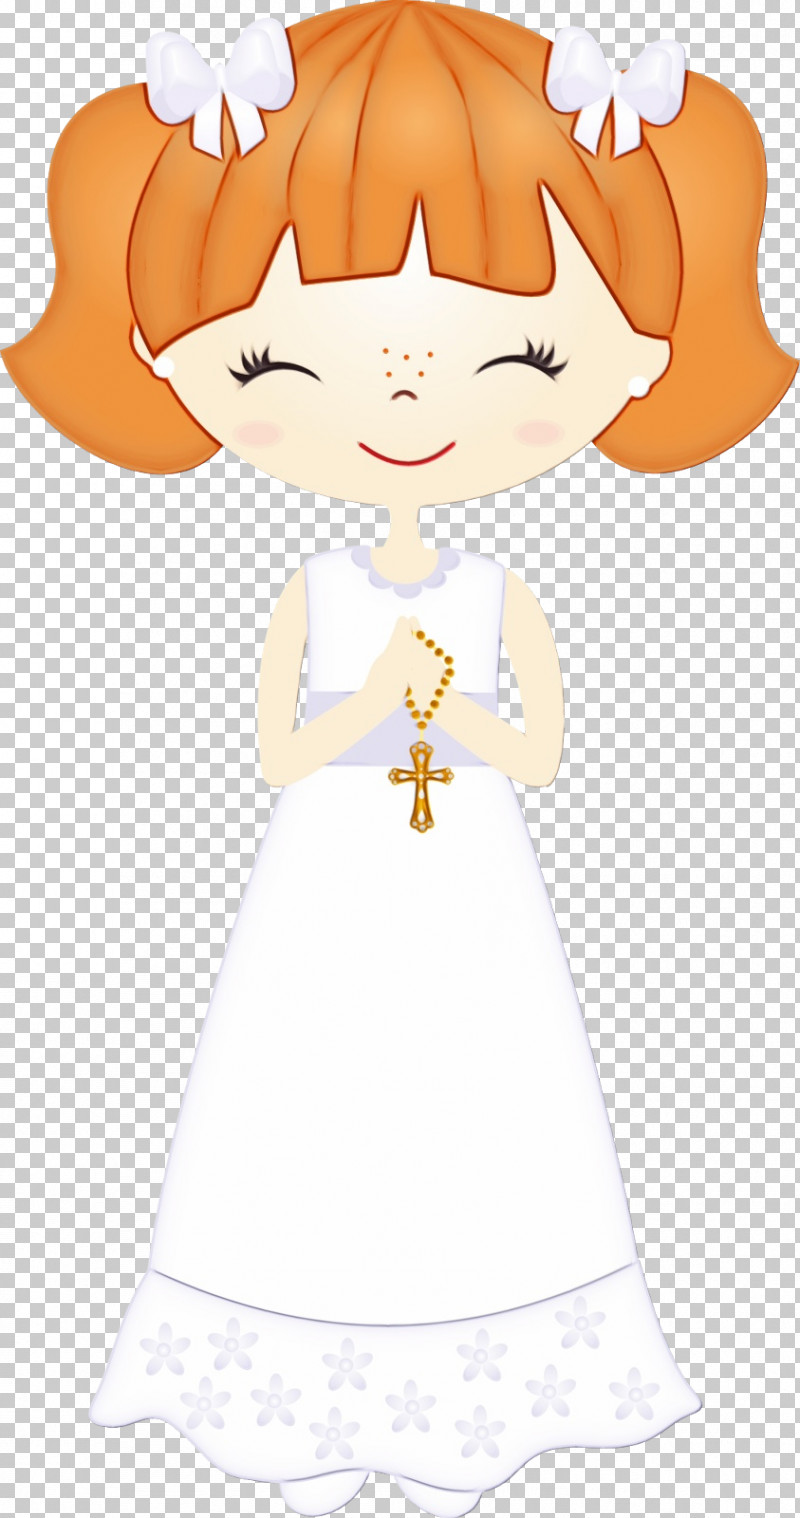 White Cartoon Angel Style PNG, Clipart, Angel, Cartoon, Paint, Style, Watercolor Free PNG Download